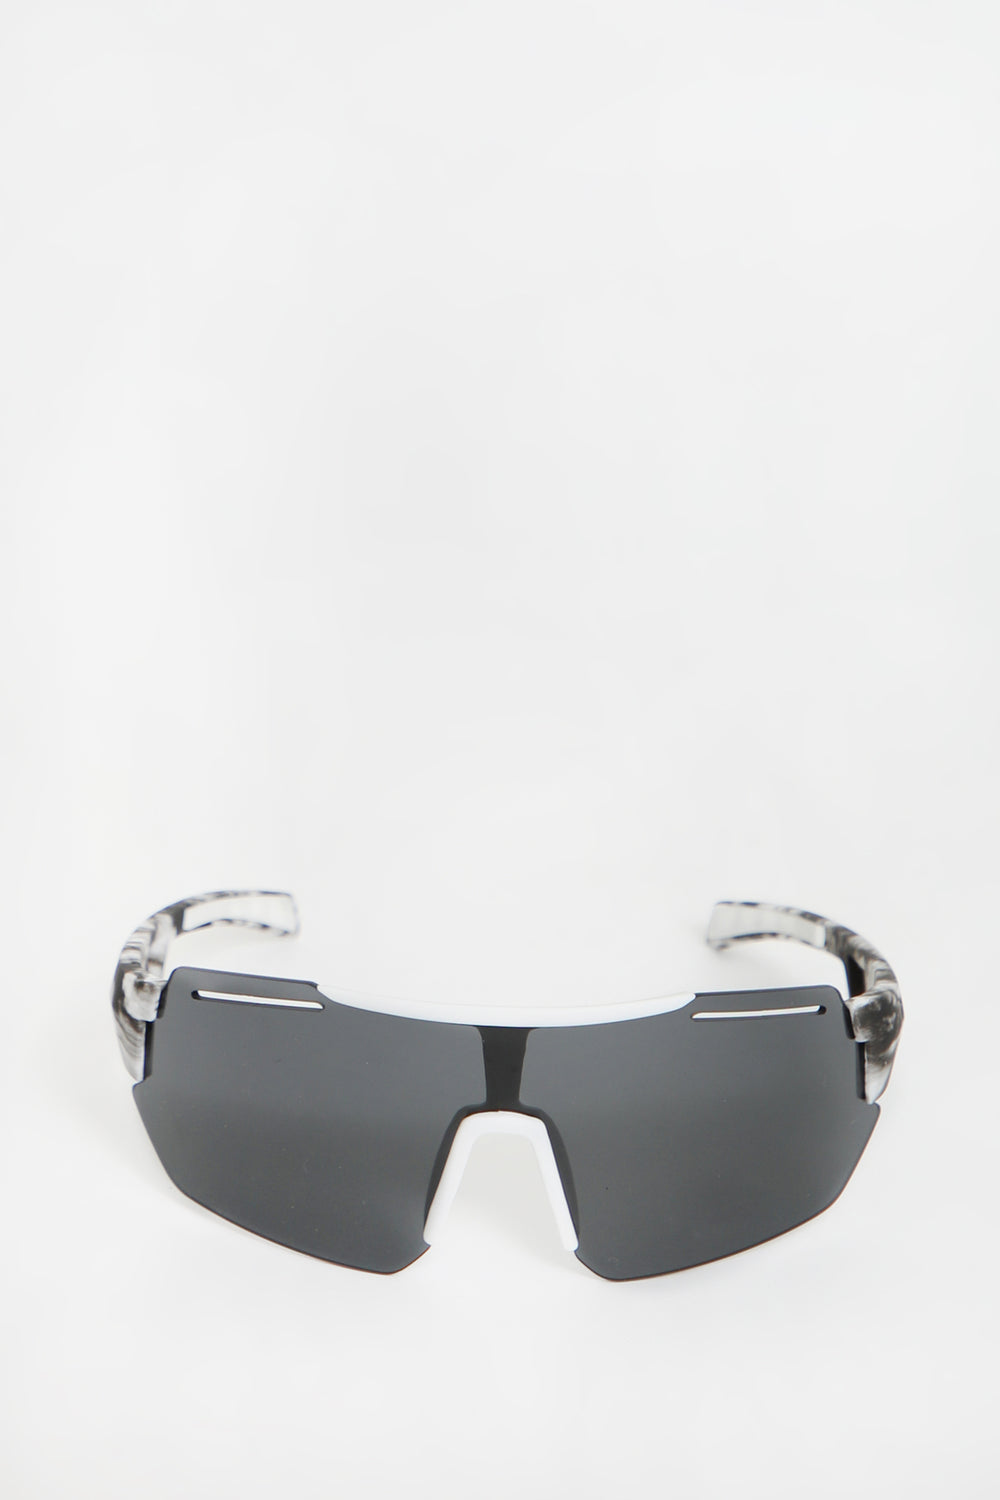 West49 Marble Shield Sunglasses West49 Marble Shield Sunglasses